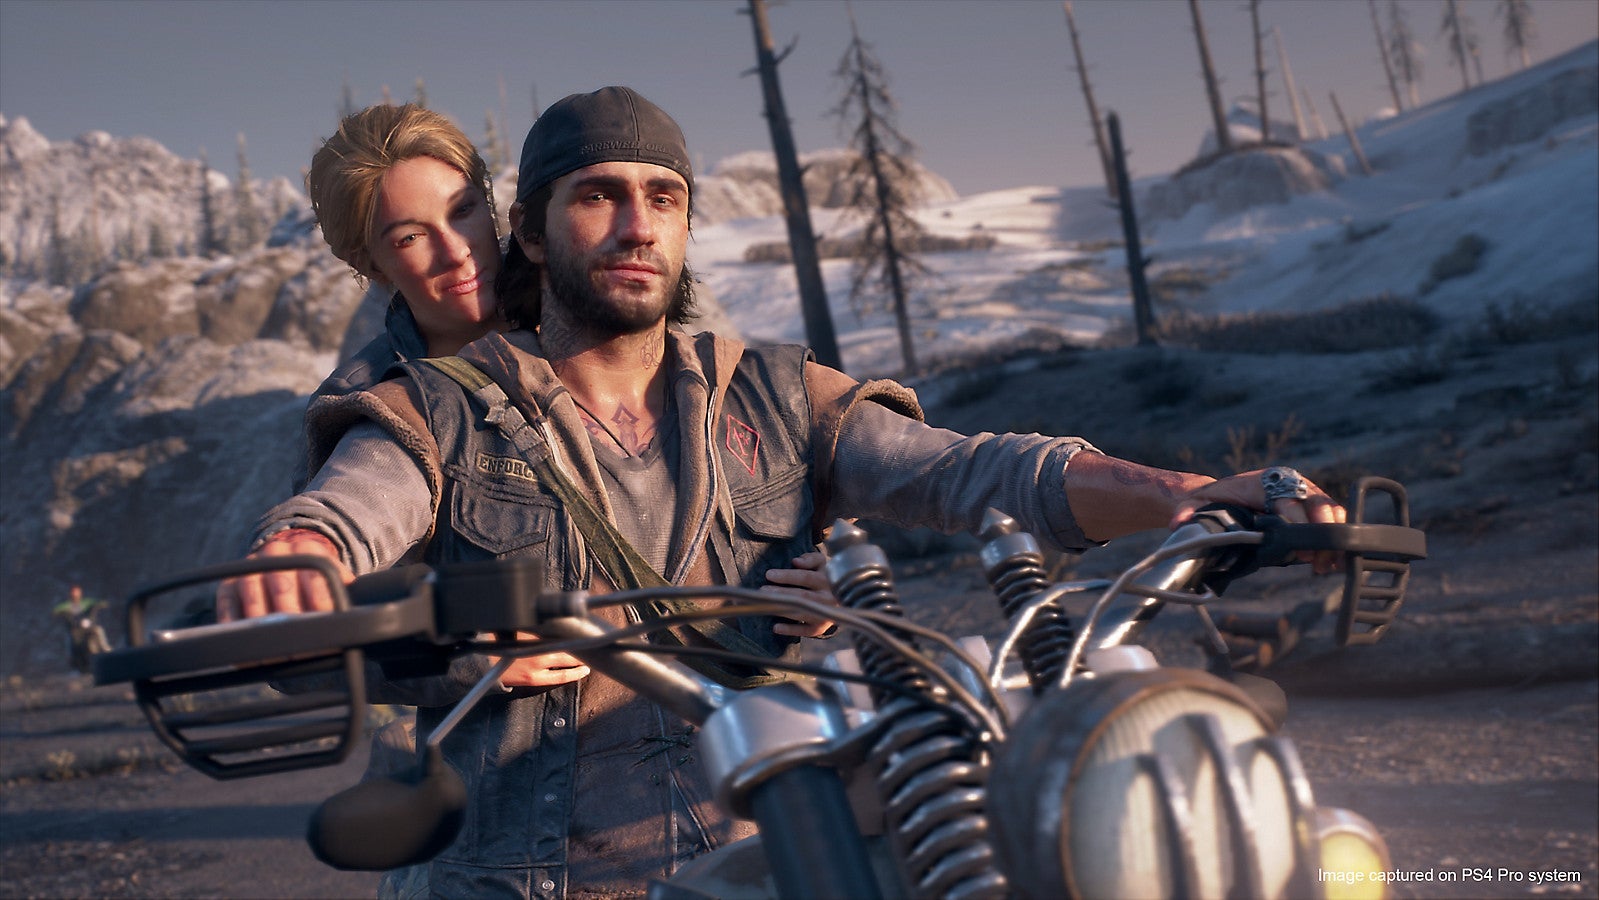 Image for More PlayStation exclusives are coming to PC, starting with Days Gone this spring